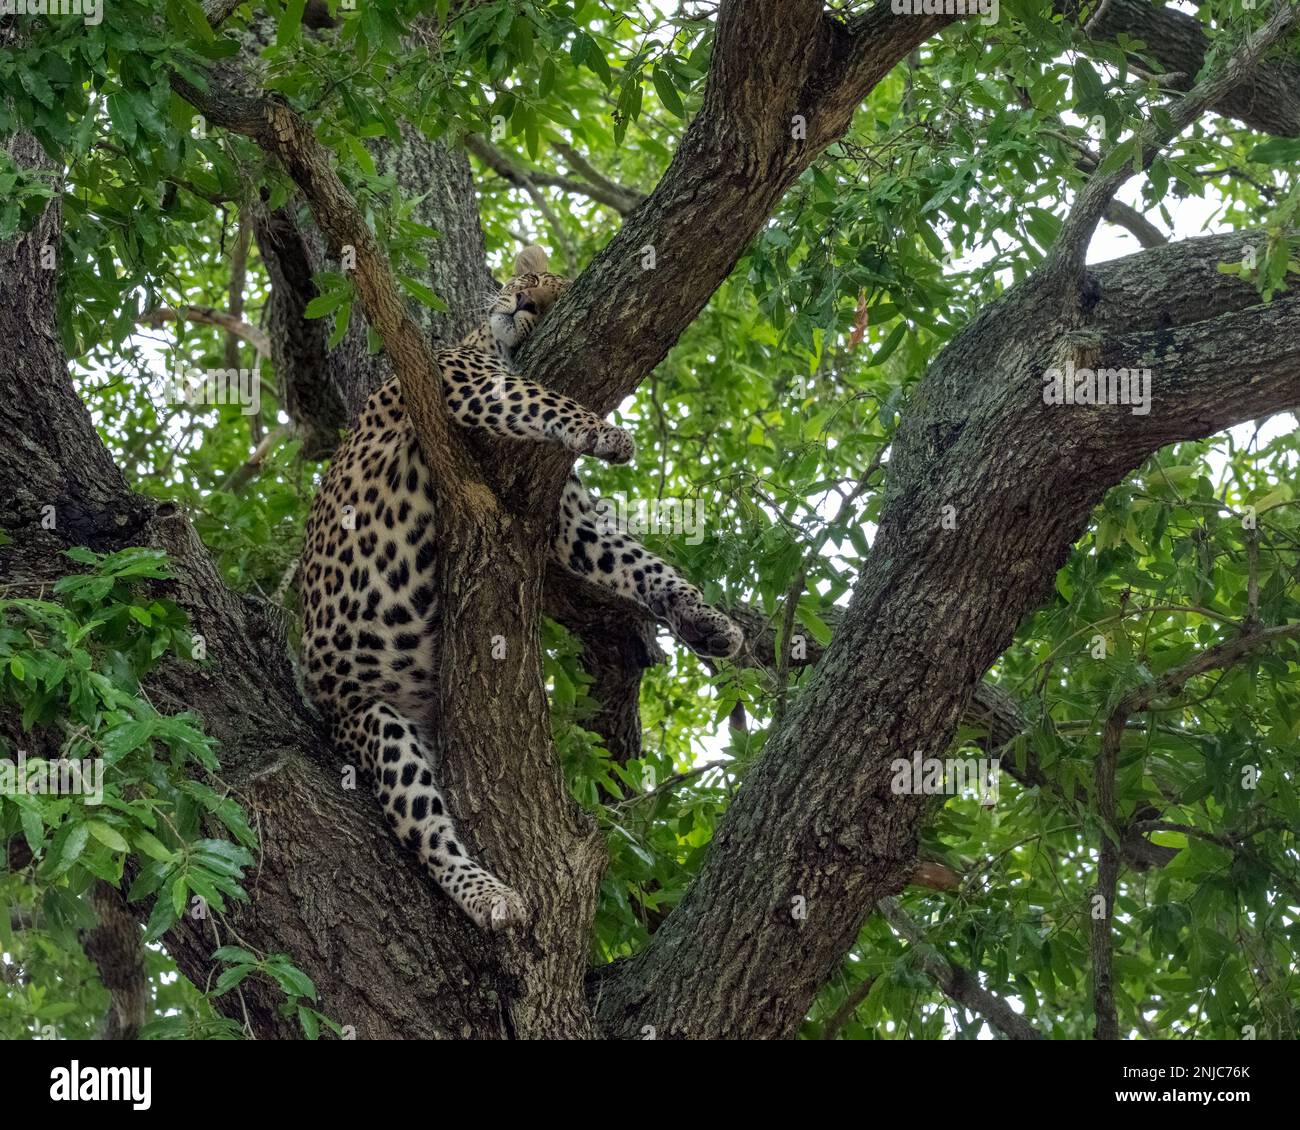 Leopard sleeping in the Branches of a Tree in South Africa Stock Photo